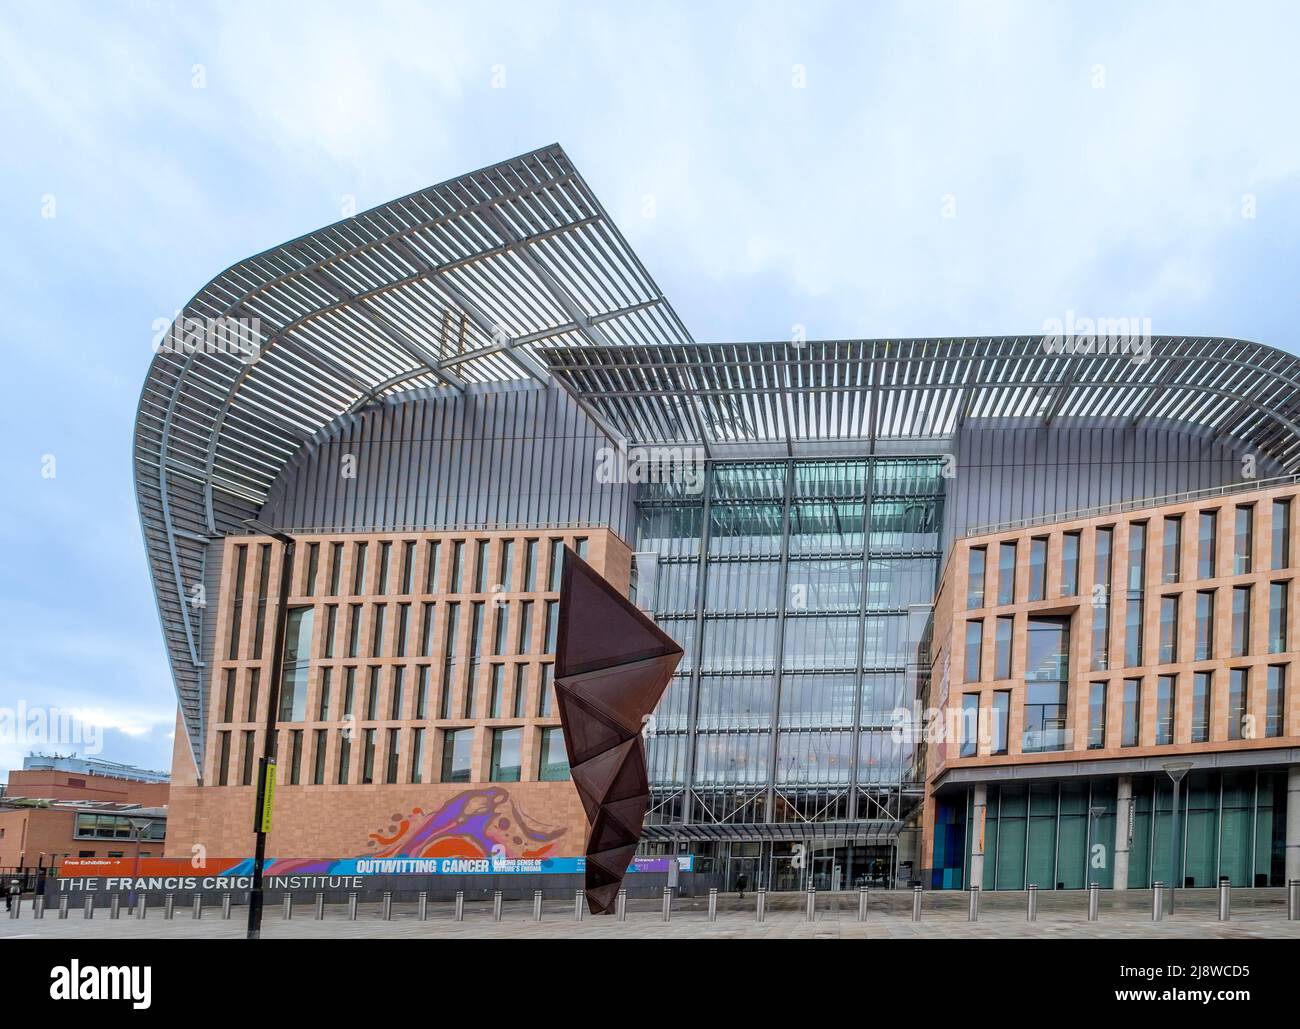 Exterior façade of The Francis Crick Institute with weathered steel Paradigm sculpture by Conrad Shawcross in the foreground. London Stock Photo